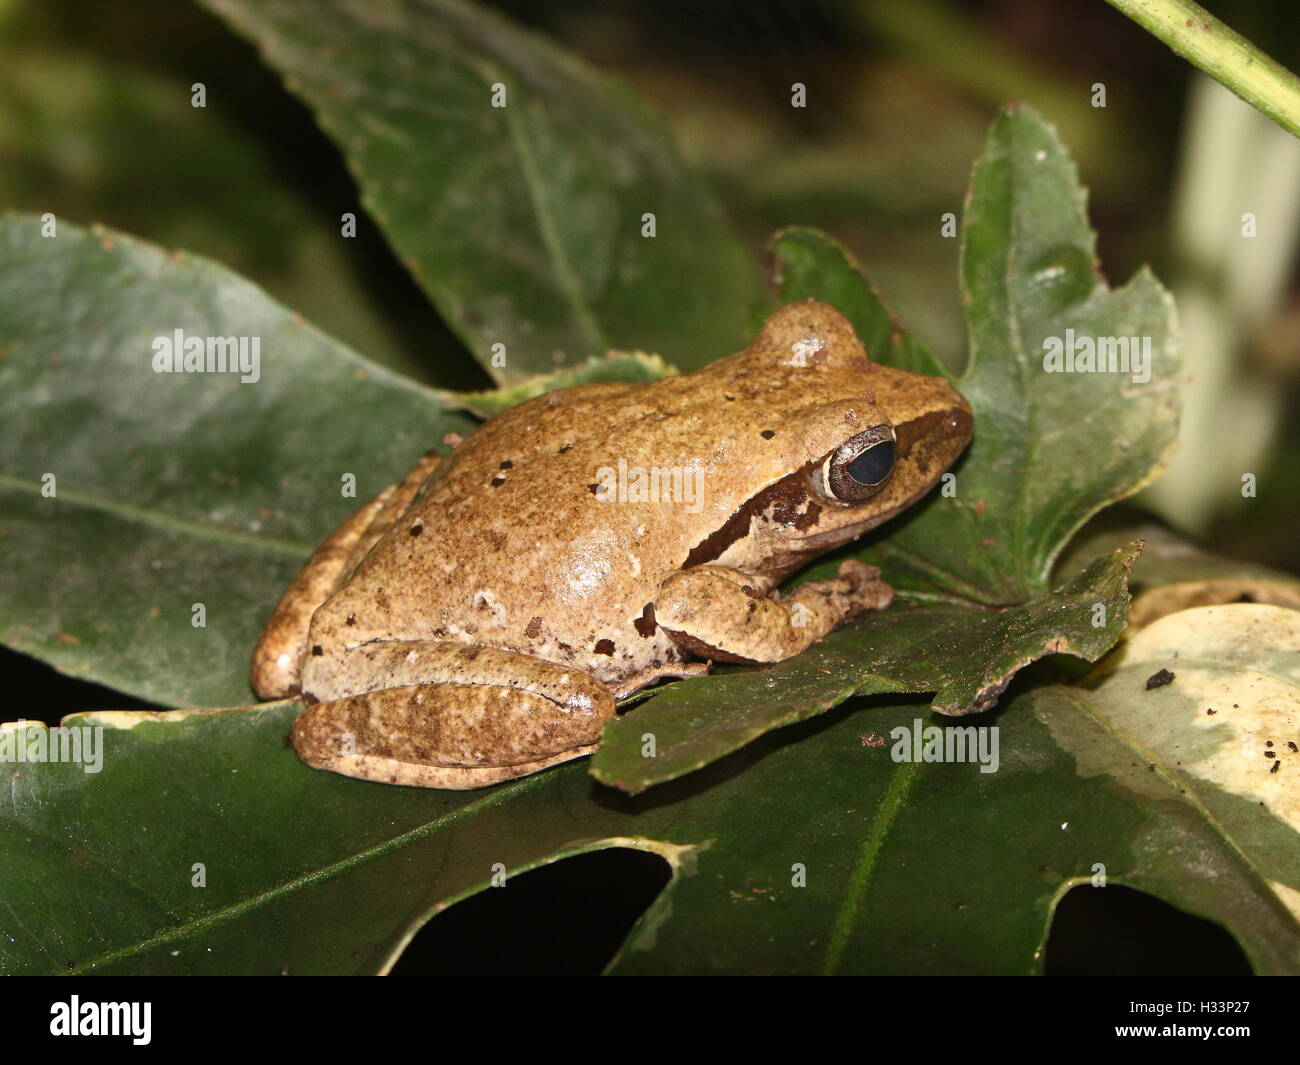 Asian Common Tree Frog or Four-lined tree frog (Polypedates leucomystax) Stock Photo